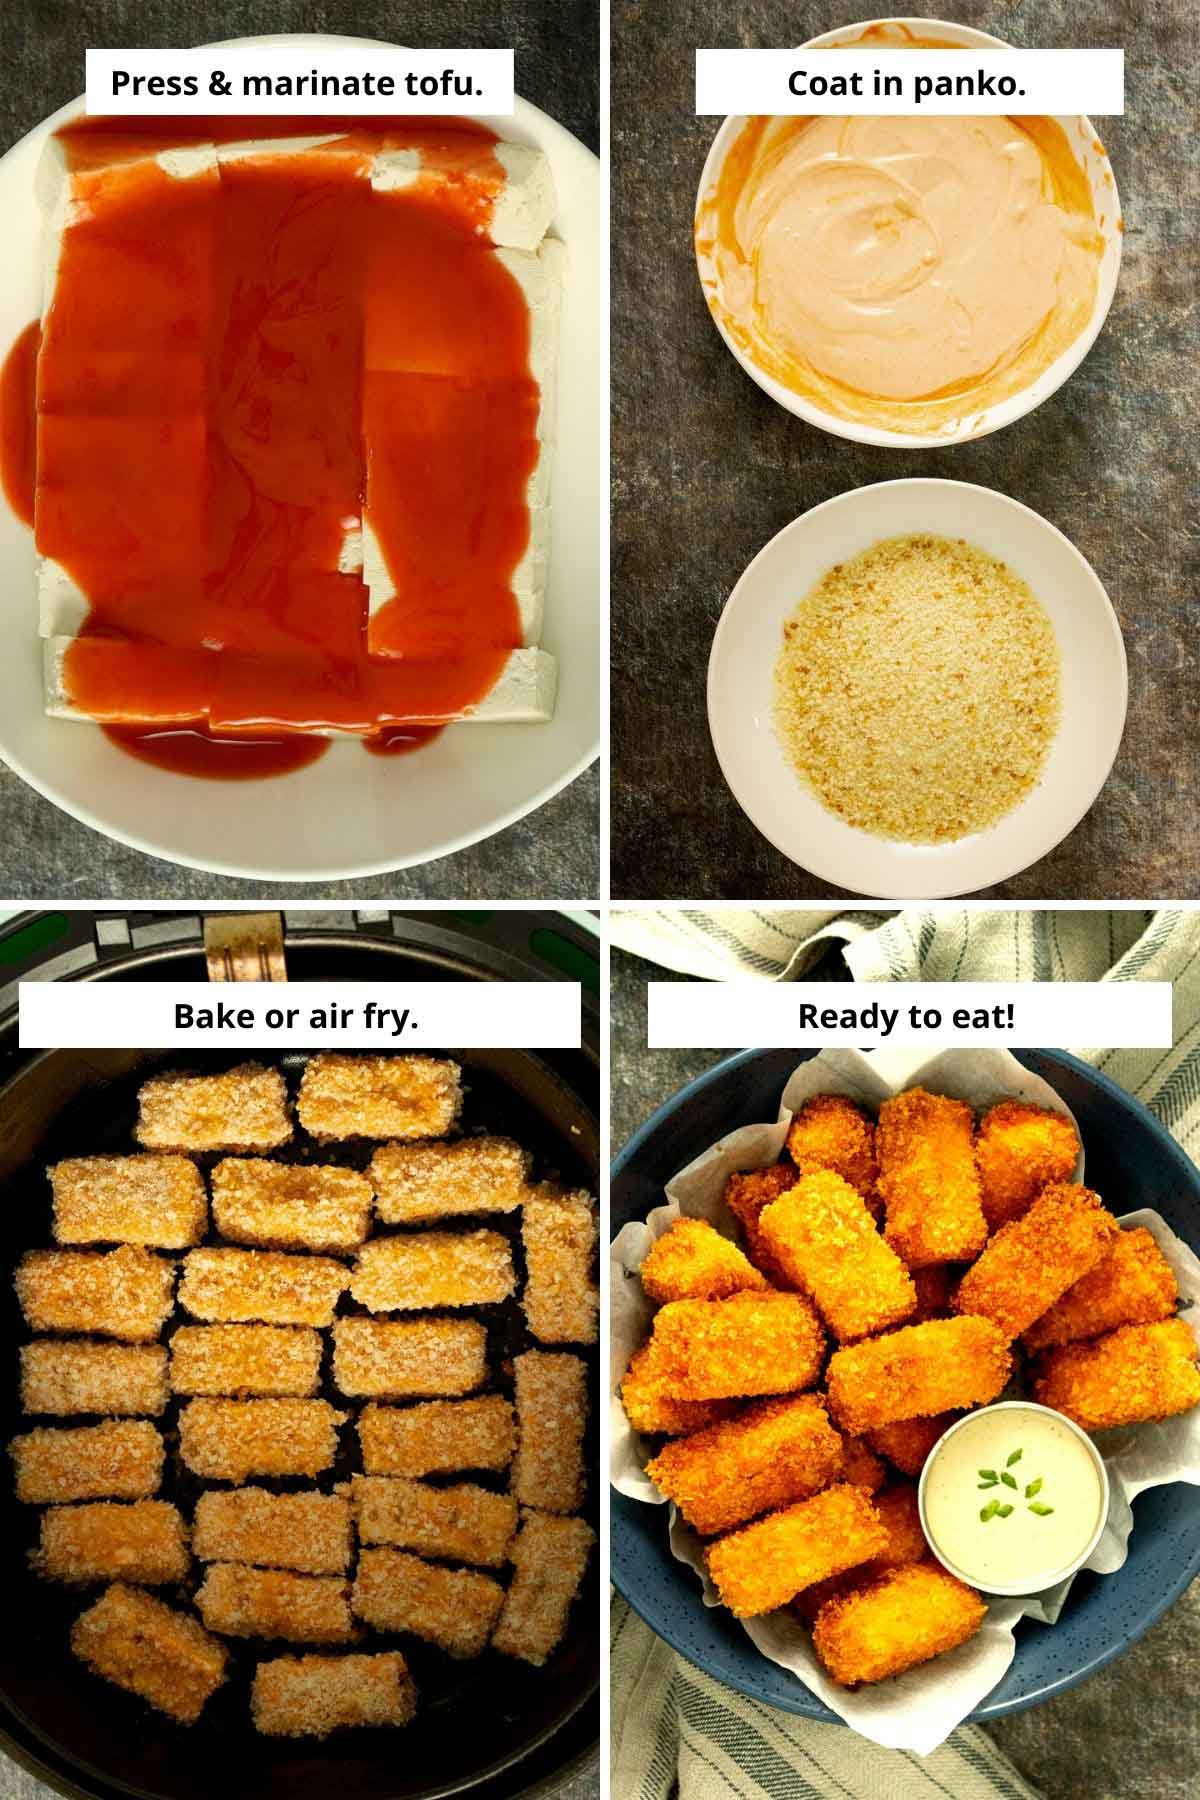 image collage showing marinating the tofu, the dredging bowls, the tofu in the air fryer, and cooked tofu in a serving bowl